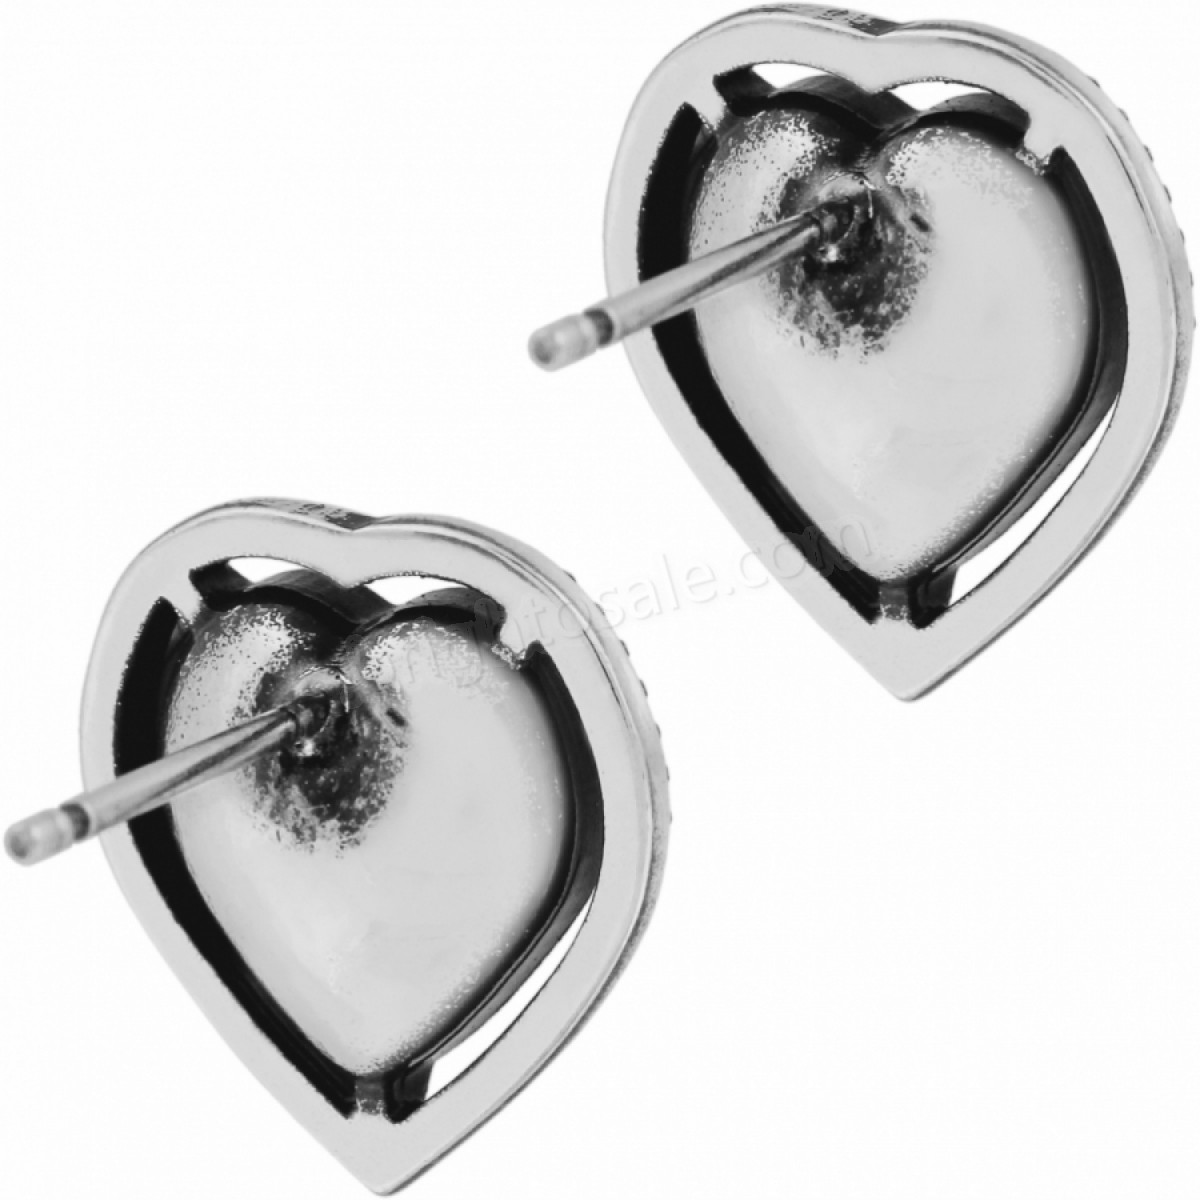 Brighton Collectibles & Online Discount Ecstatic Heart Post Earrings - -2